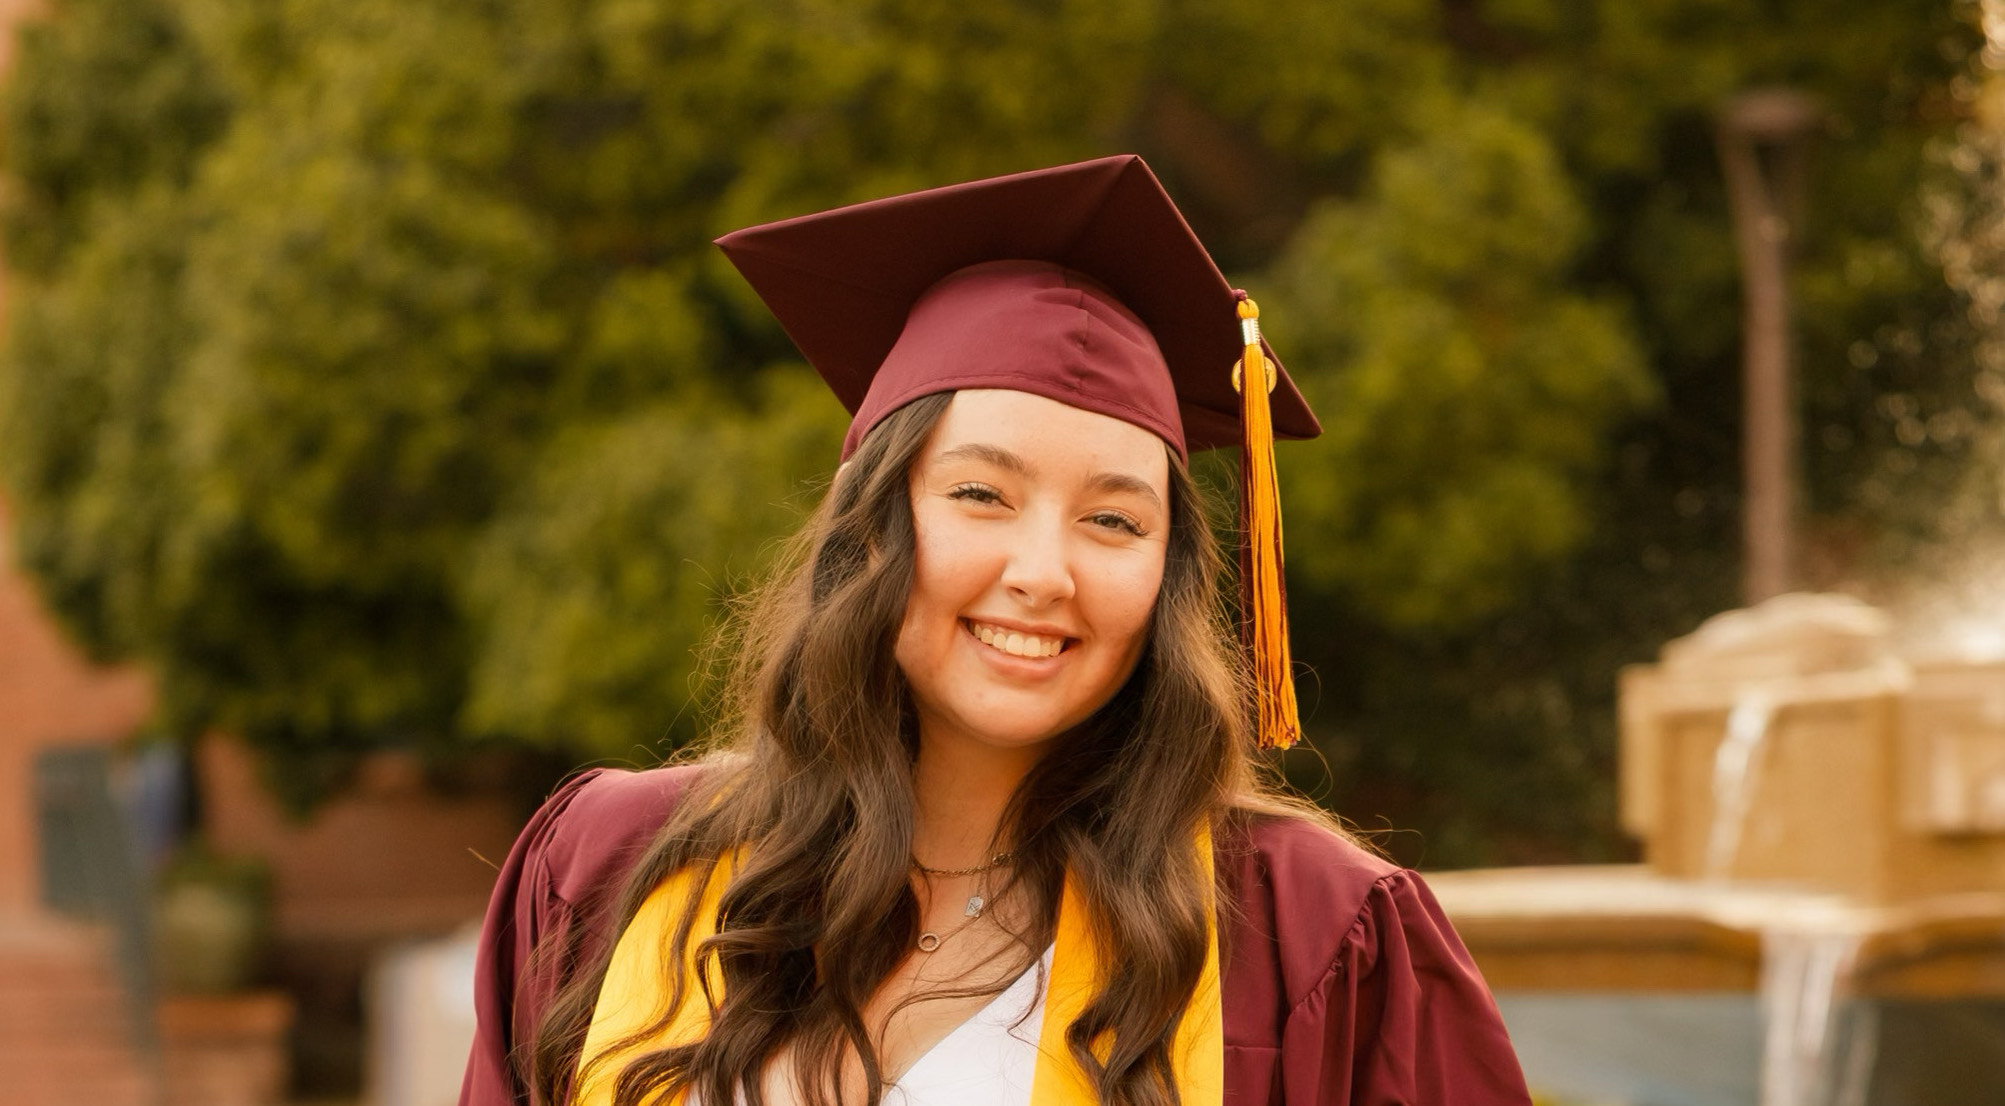 A woman with long brown hair wears a maroon graduation cap and gown.